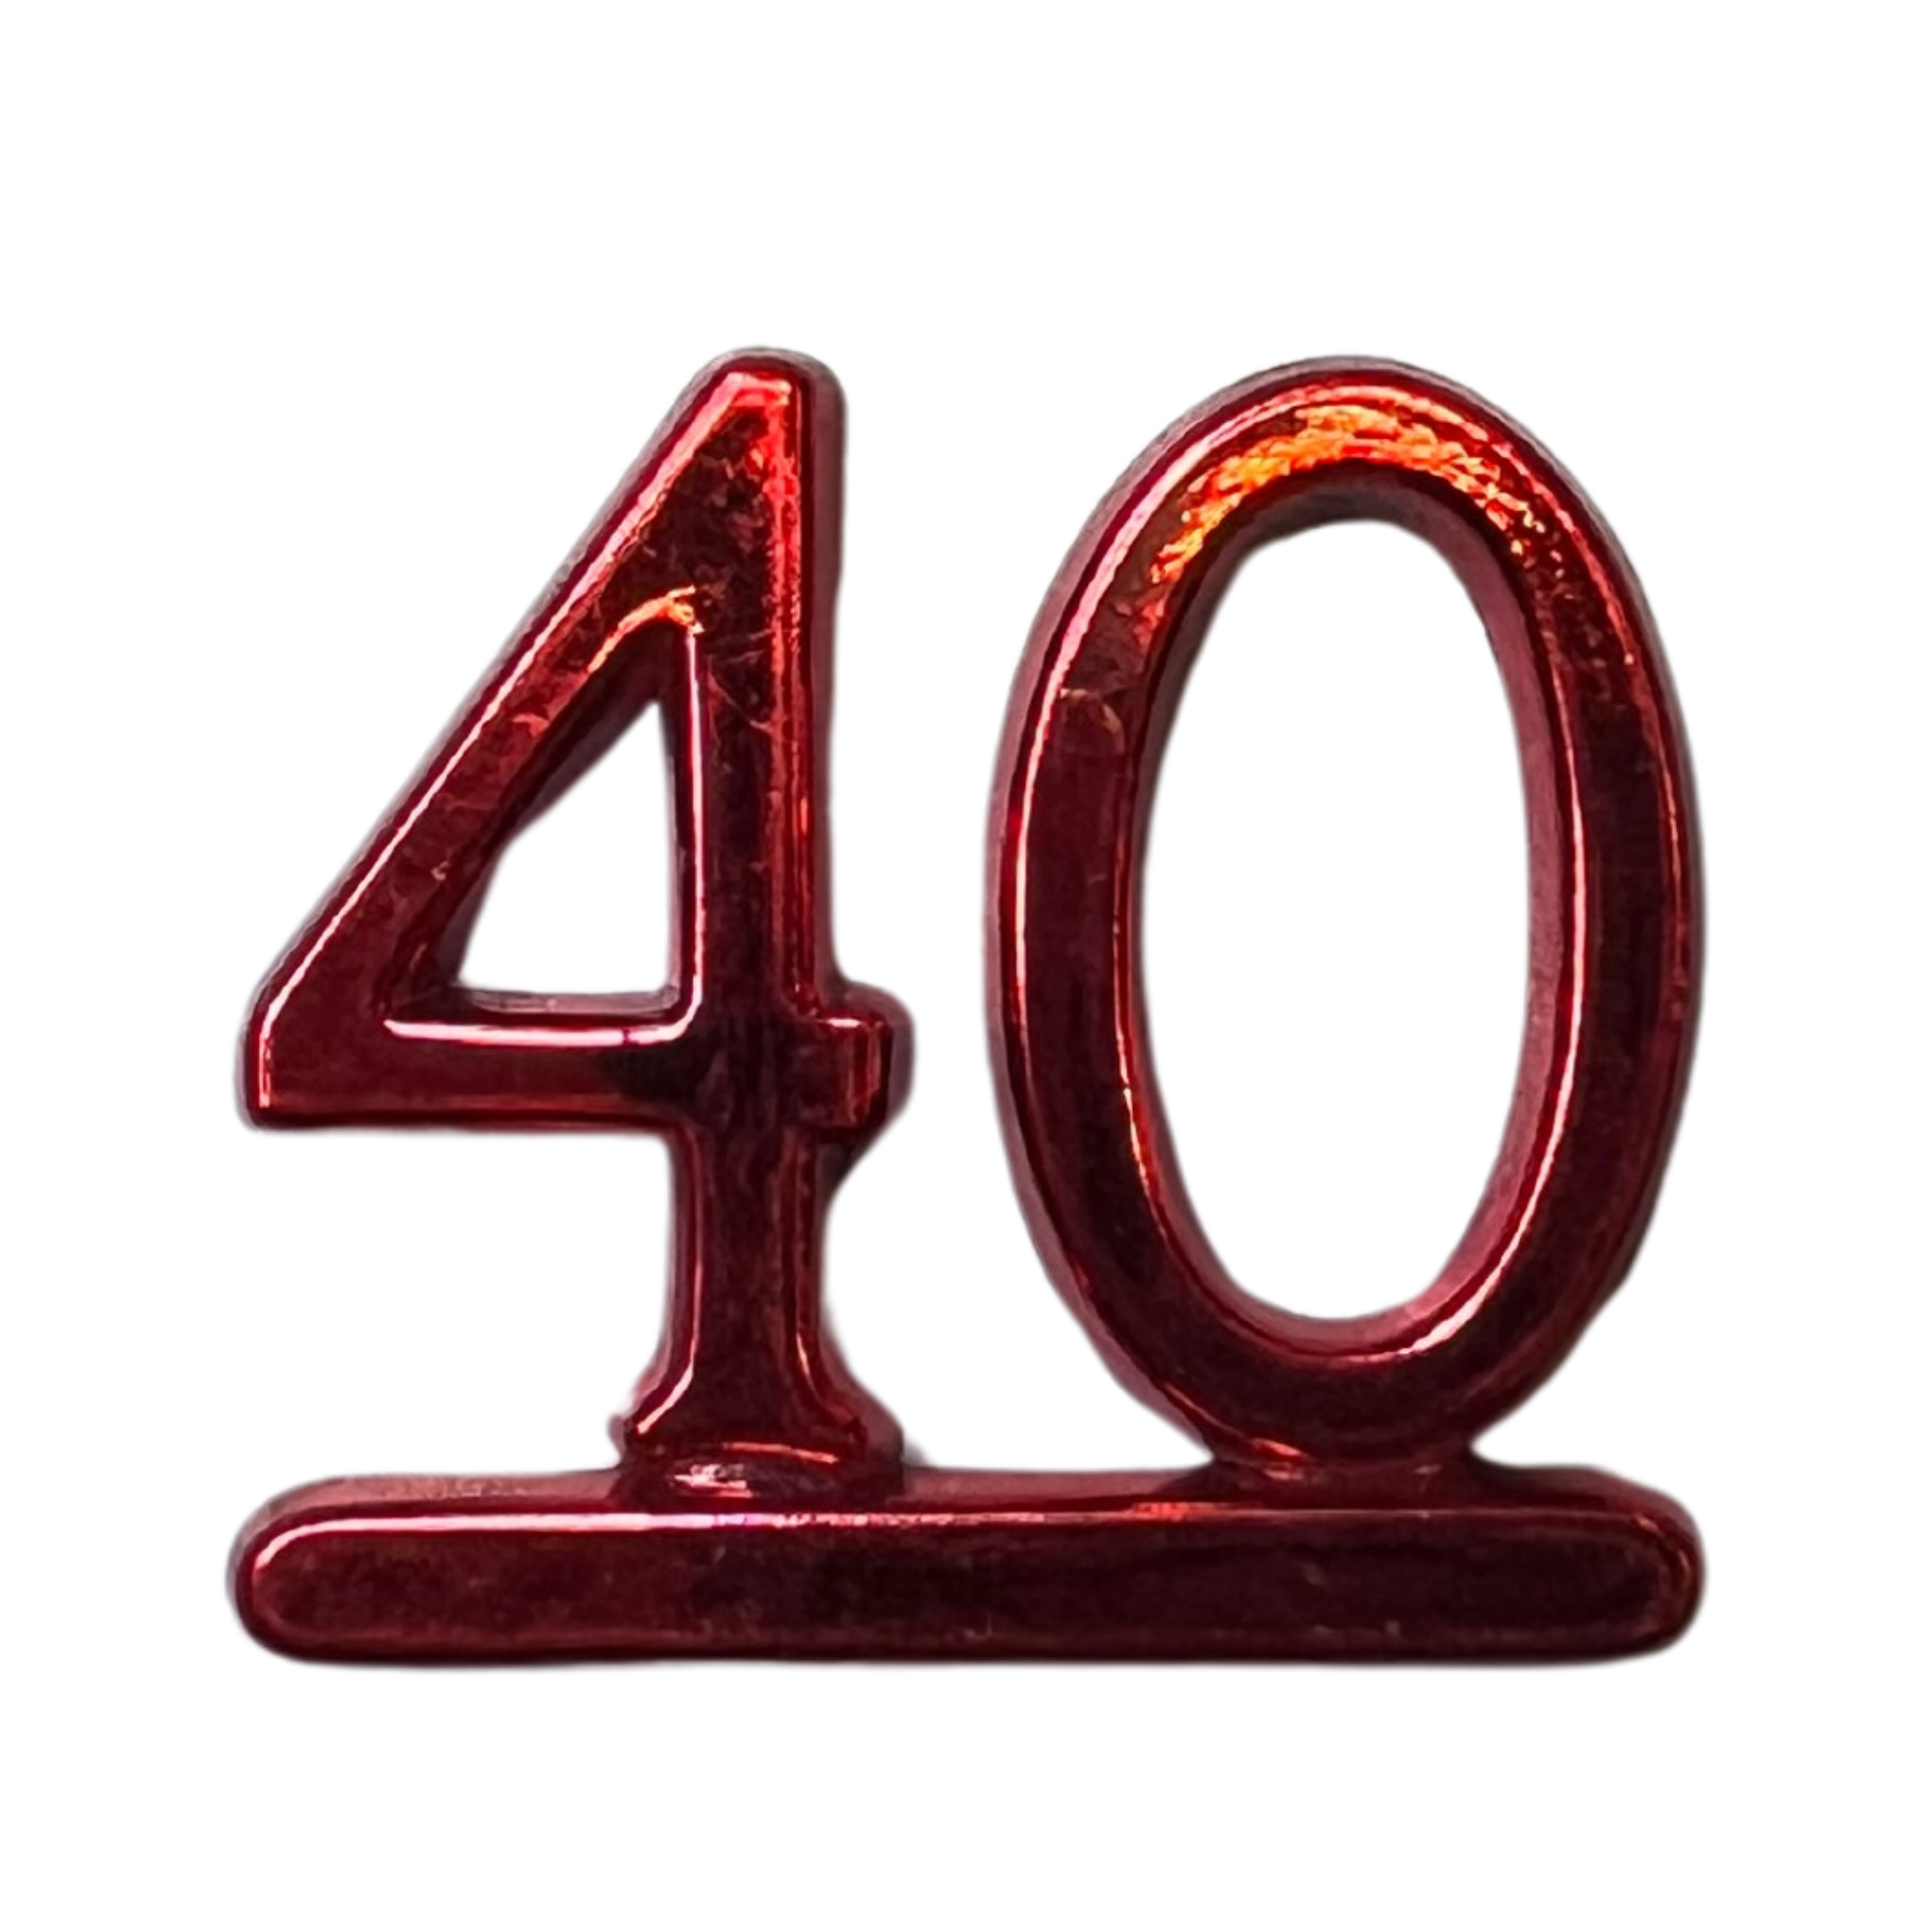 Small Number / Numeral Plastic Cake or Craft Decoration - Red 40